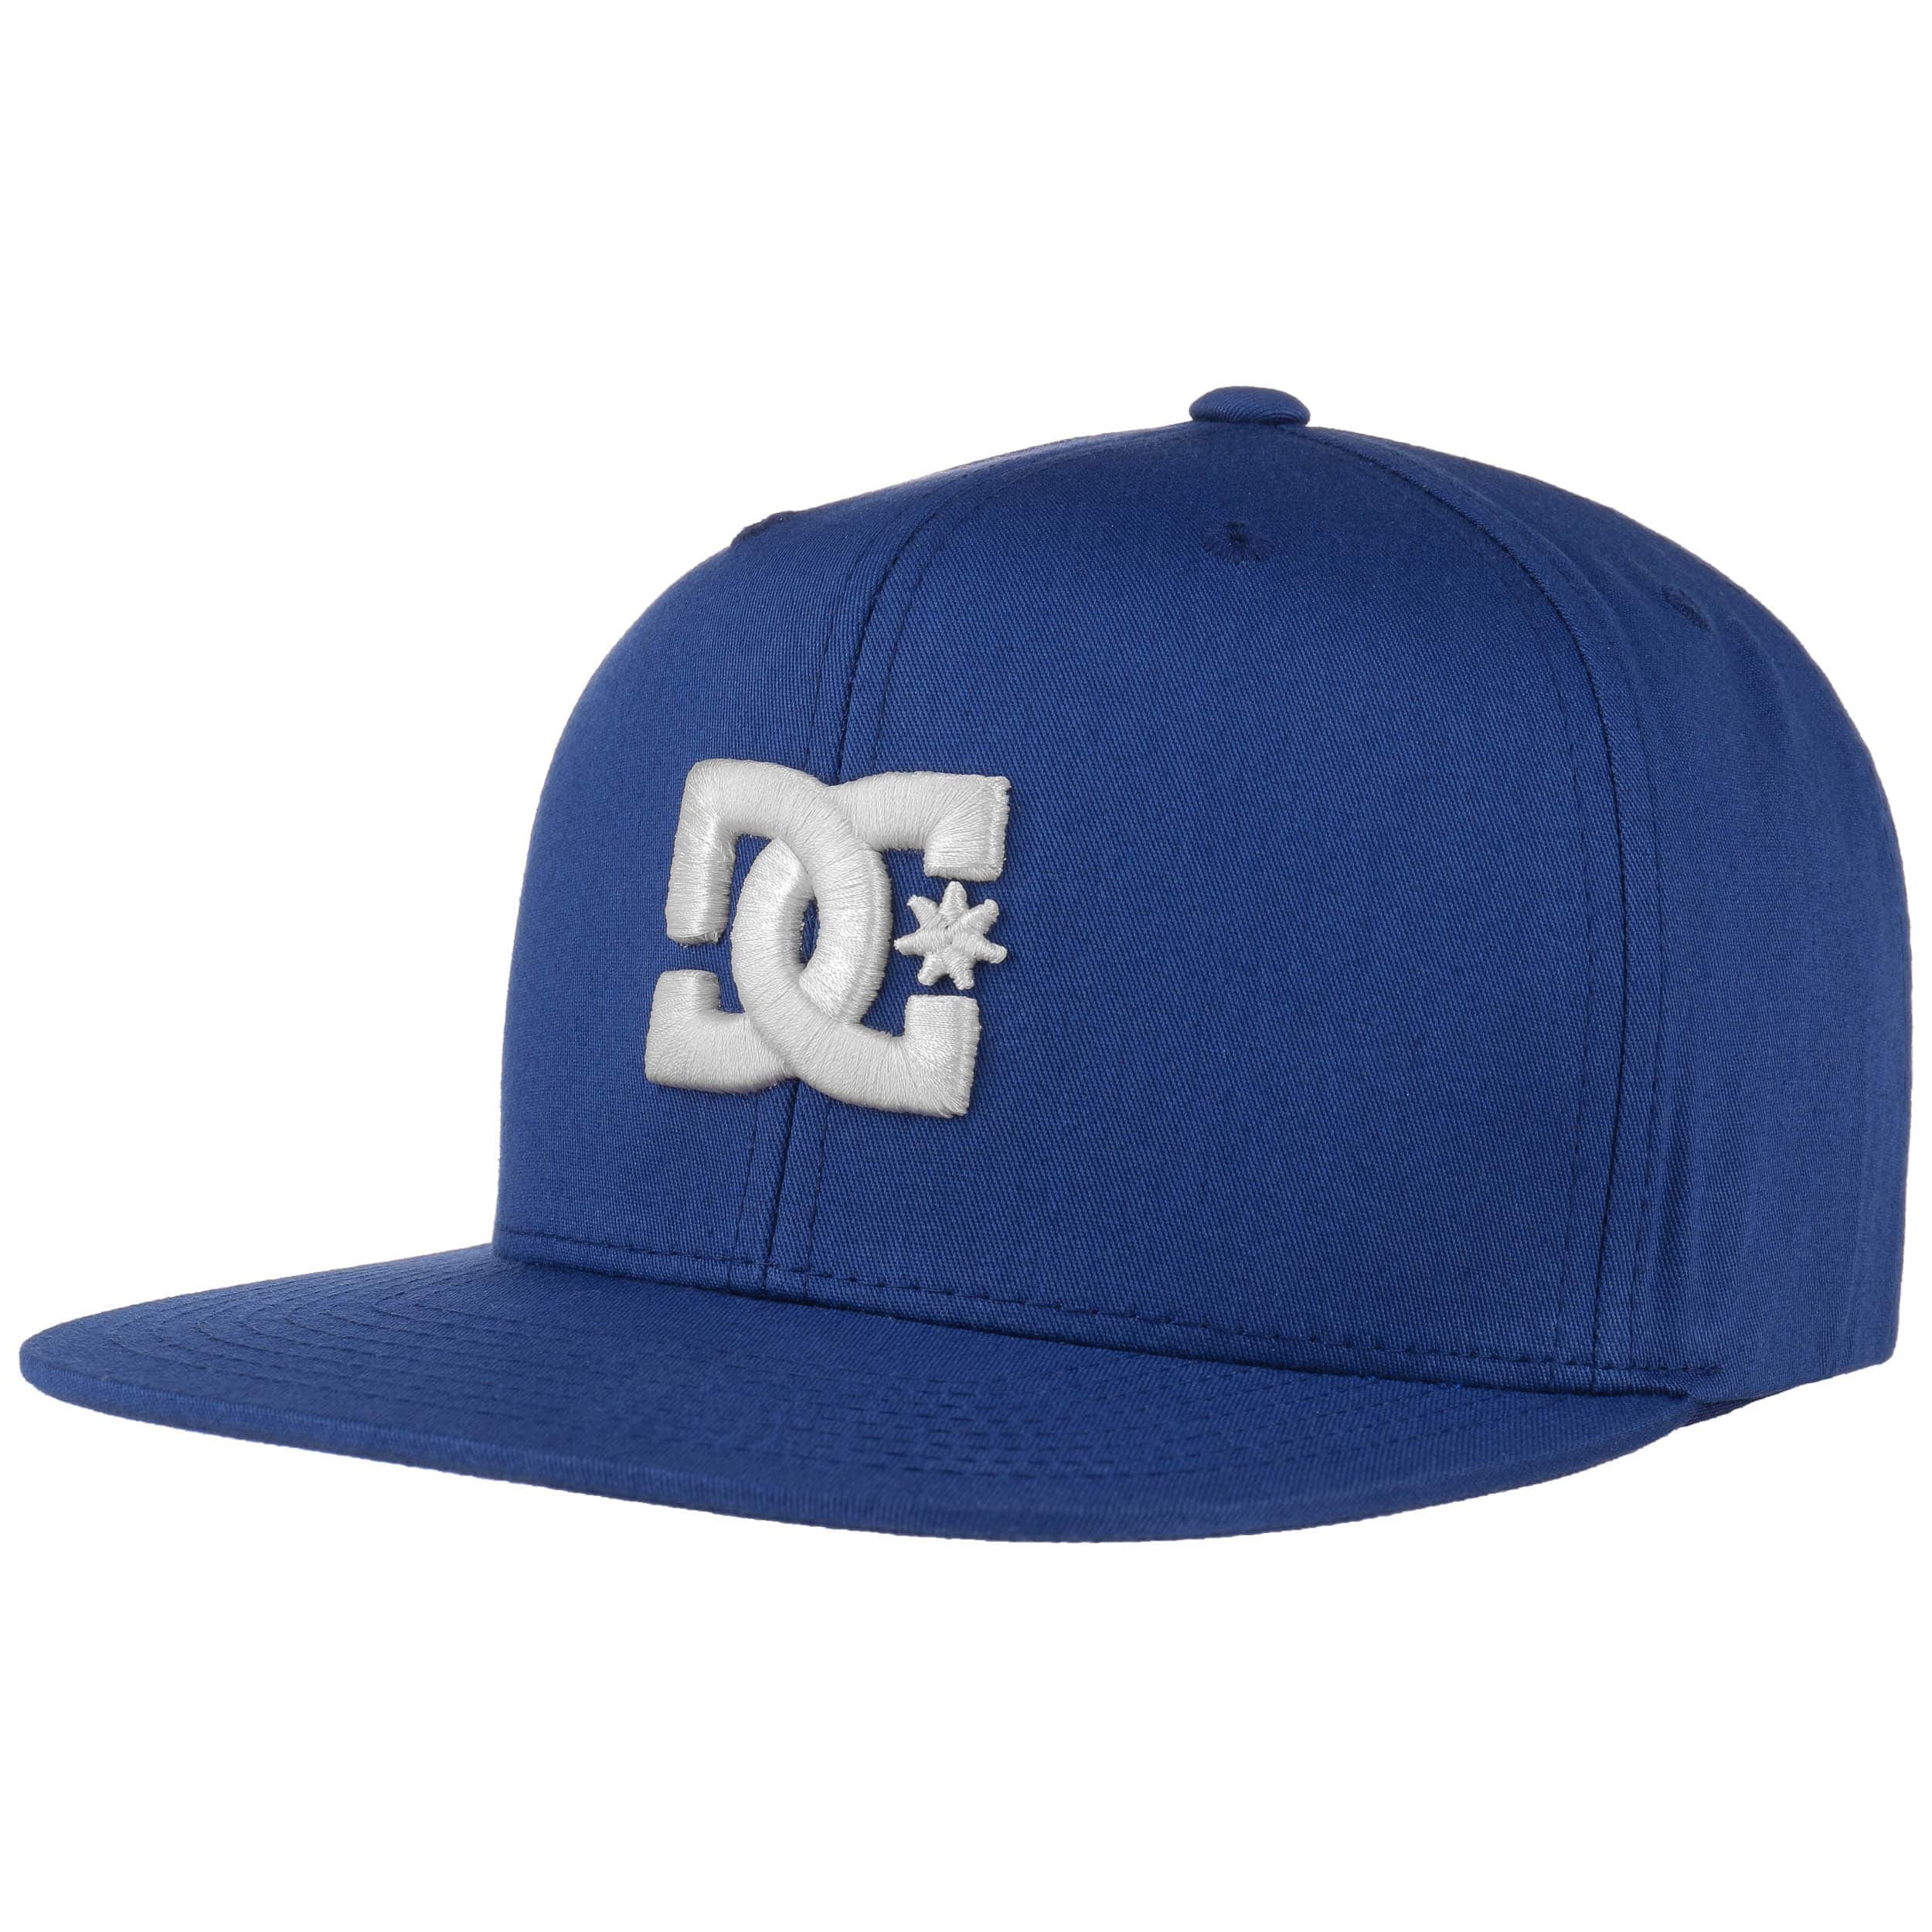 Snappy Snapback Cap by DC 26,95 - € Co Shoes